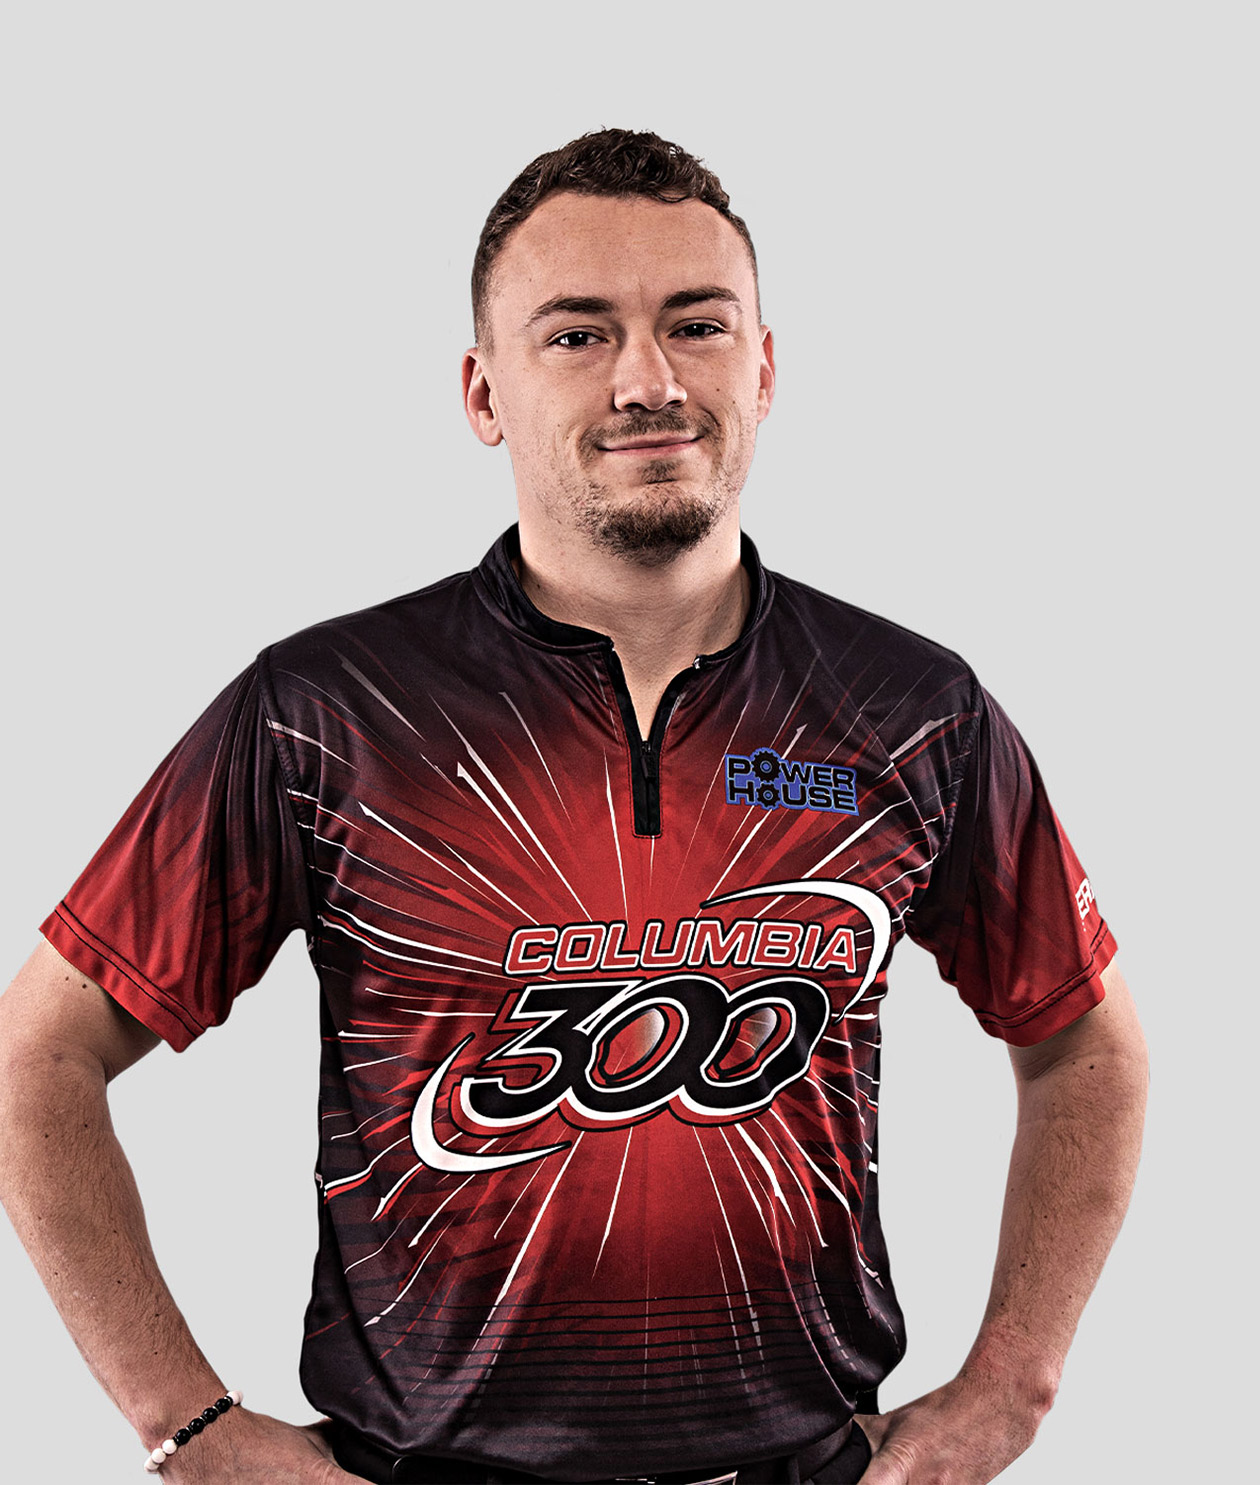 A man in a bowling shirt poses for a photo